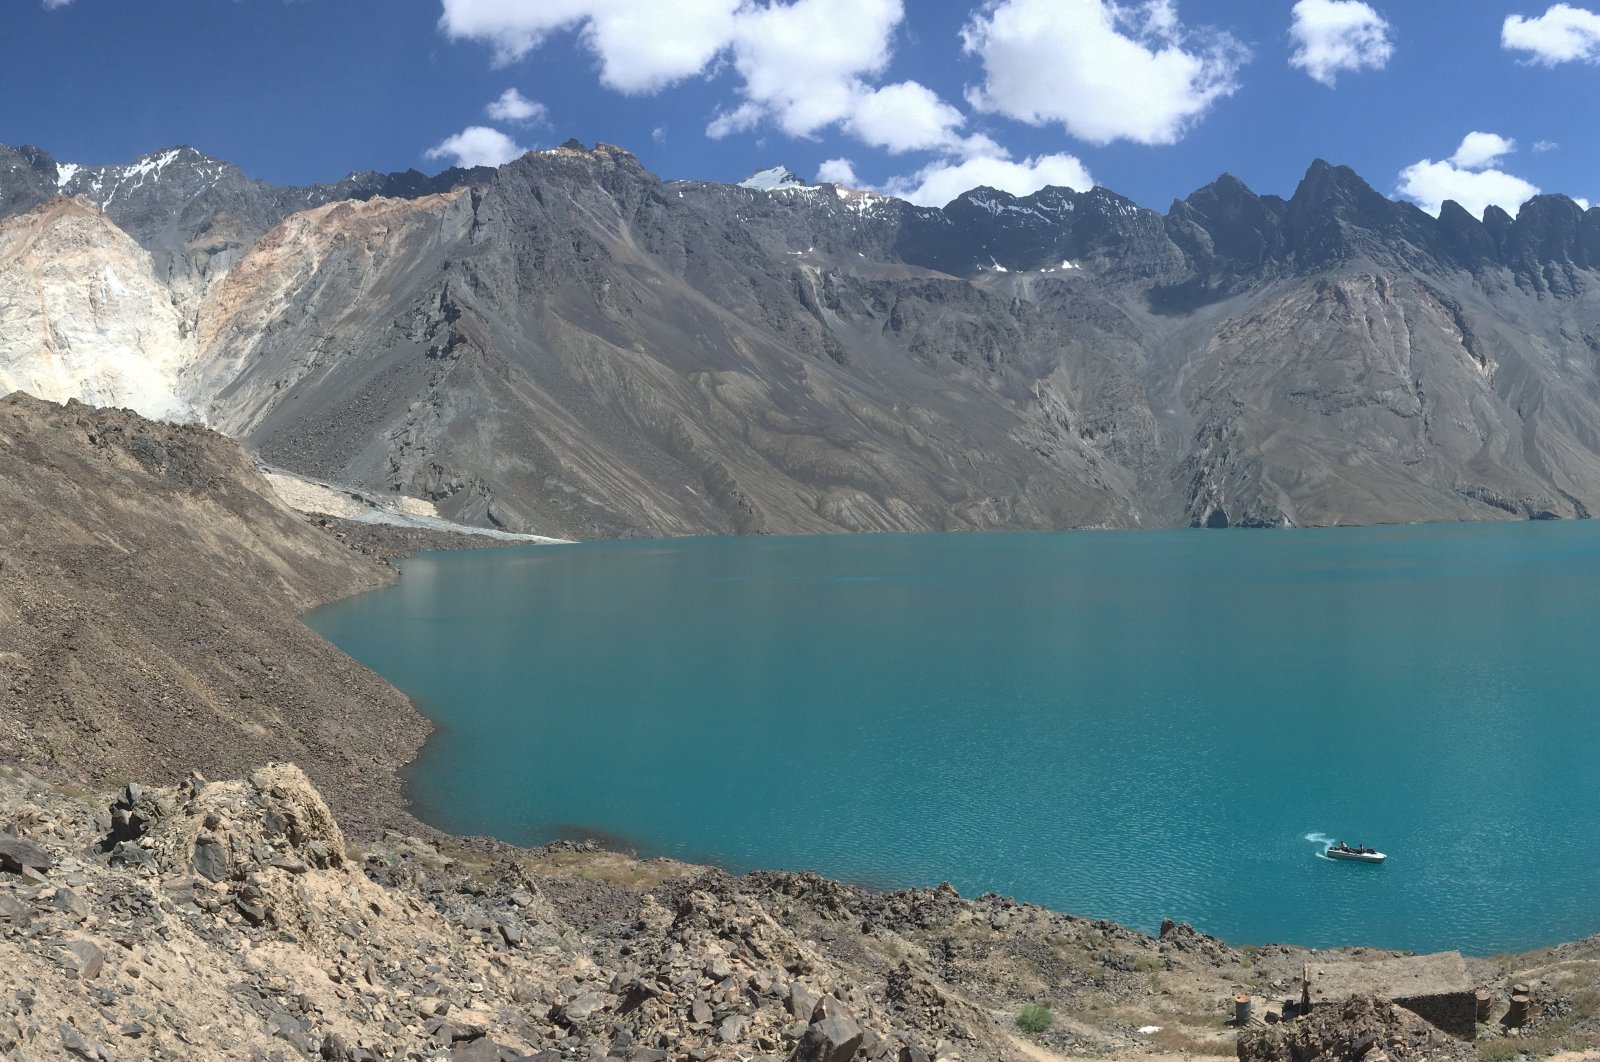 This undated photo shows a view of Lake Sarez and Usoy Landslide Dam in the Pamir Mountains, Tajikistan.